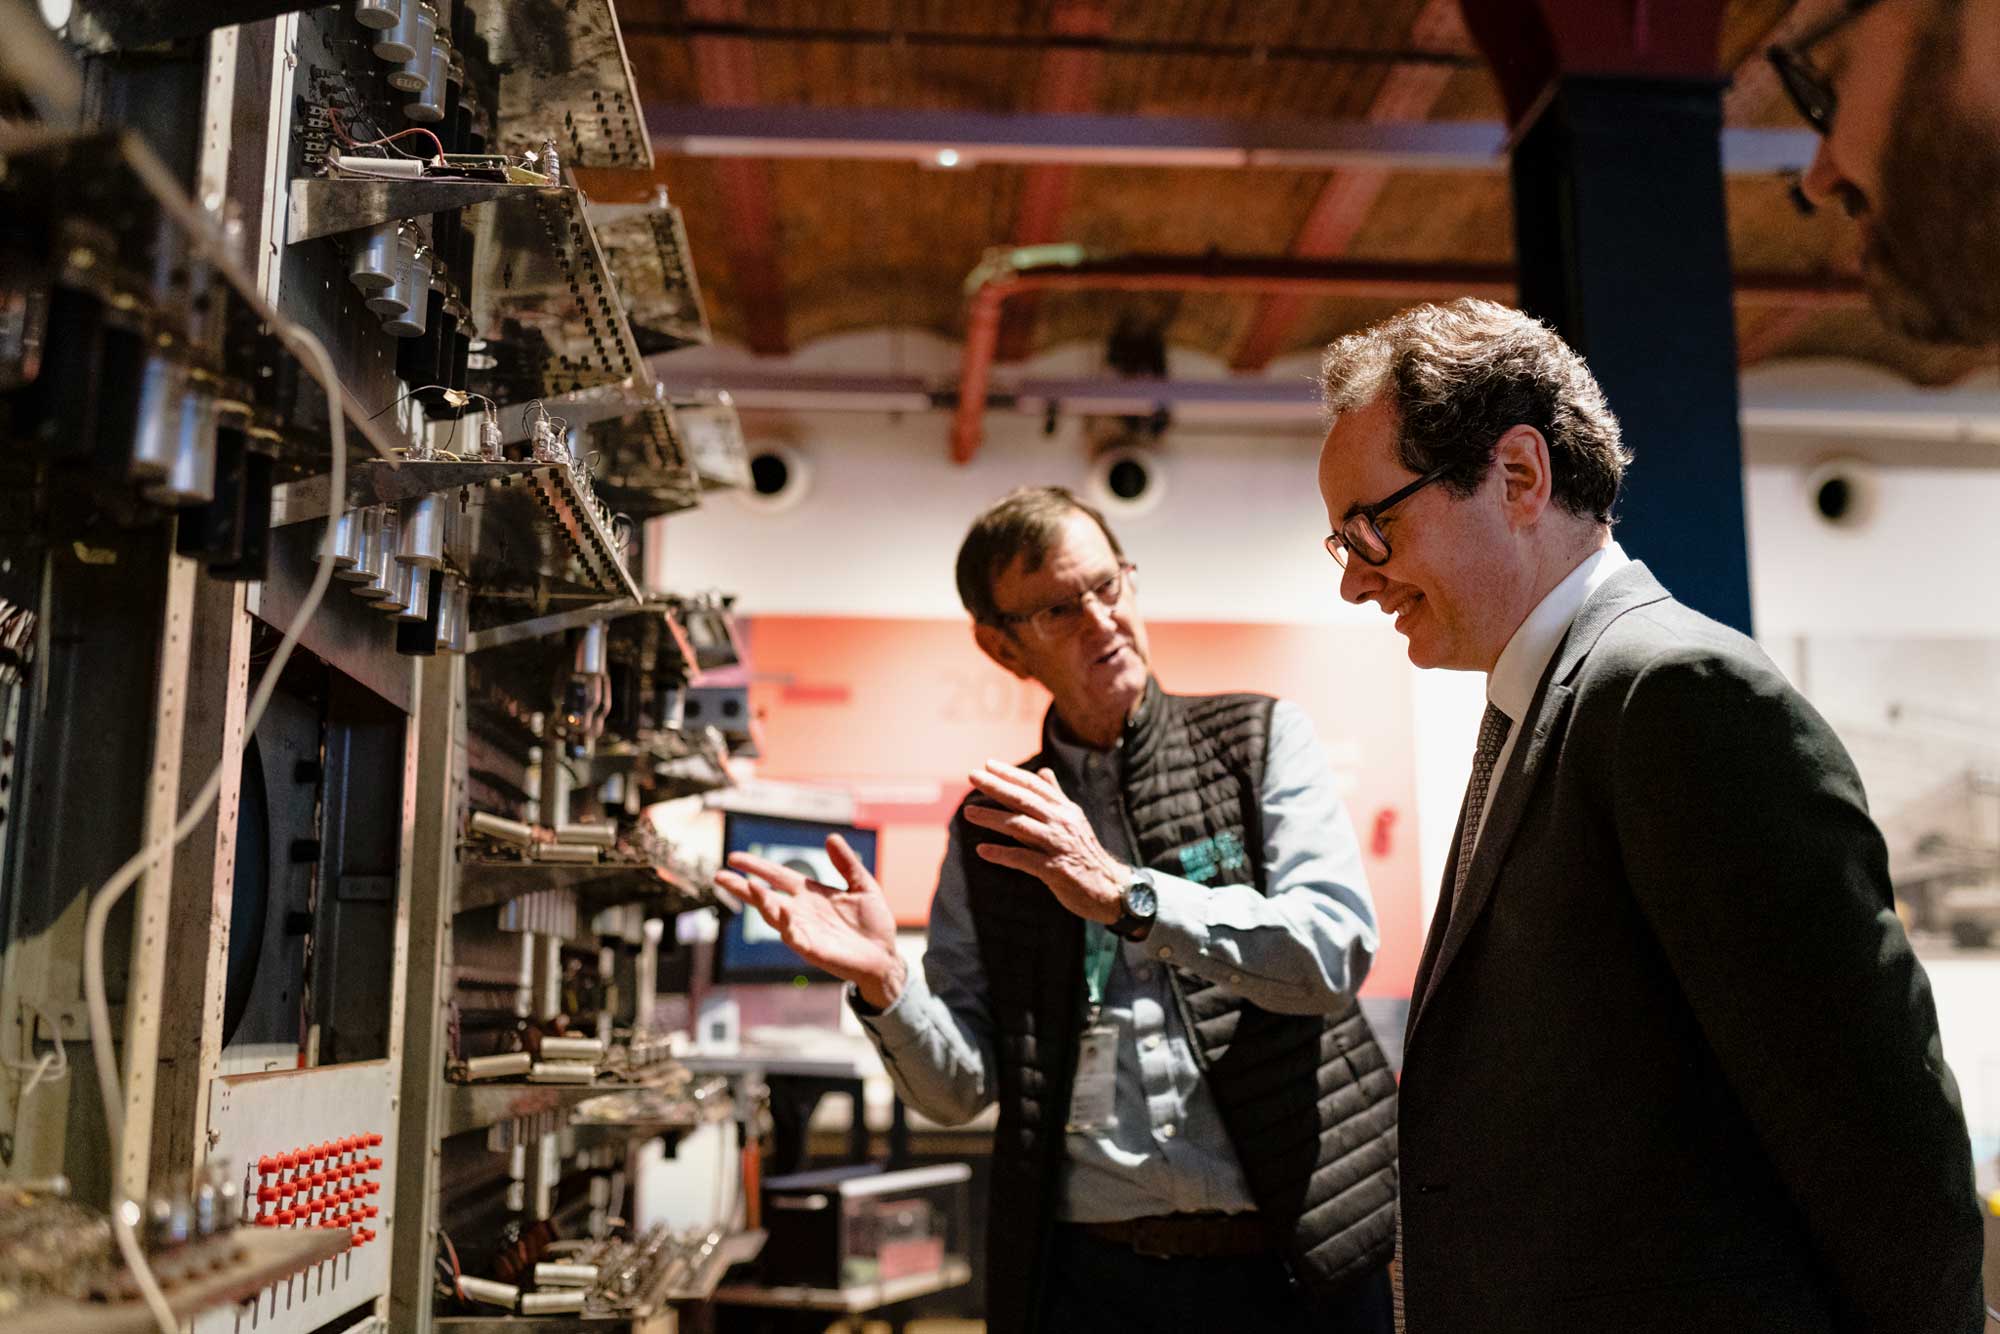 Two men looking at an early computer on display in a museum